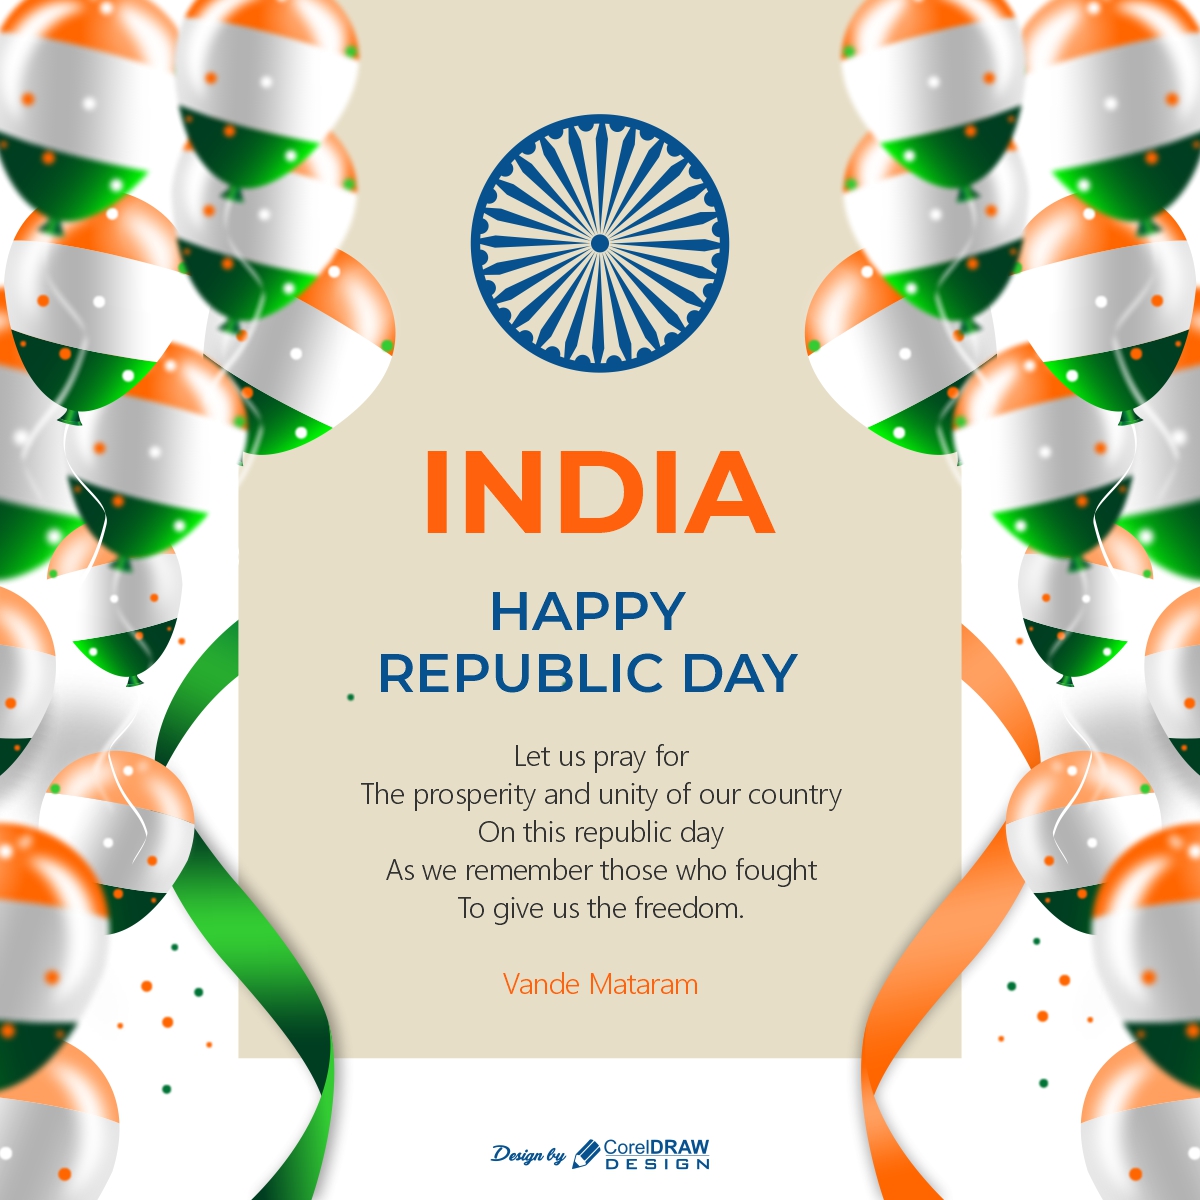 Download Indian Republic Day Card Concept & Creative Background | CorelDraw  Design (Download Free CDR, Vector, Stock Images, Tutorials, Tips & Tricks)